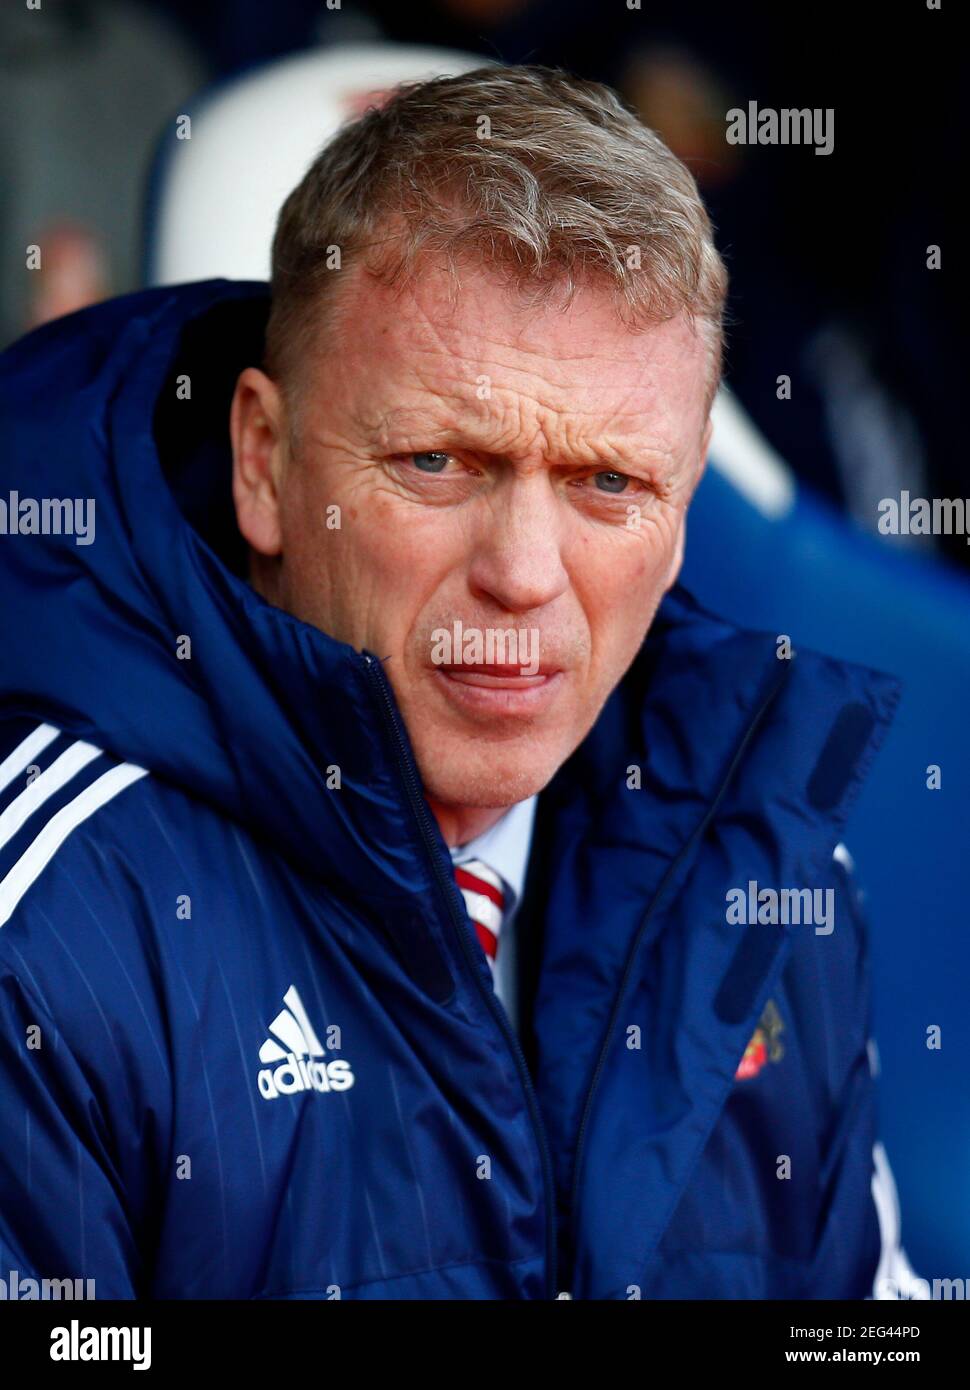 Britain Football Soccer - Crystal Palace v Sunderland - Premier League - Selhurst Park - 4/2/17 Sunderland manager David Moyes  Reuters / Andrew Winning Livepic EDITORIAL USE ONLY. No use with unauthorized audio, video, data, fixture lists, club/league logos or 'live' services. Online in-match use limited to 45 images, no video emulation. No use in betting, games or single club/league/player publications.  Please contact your account representative for further details. Stock Photo